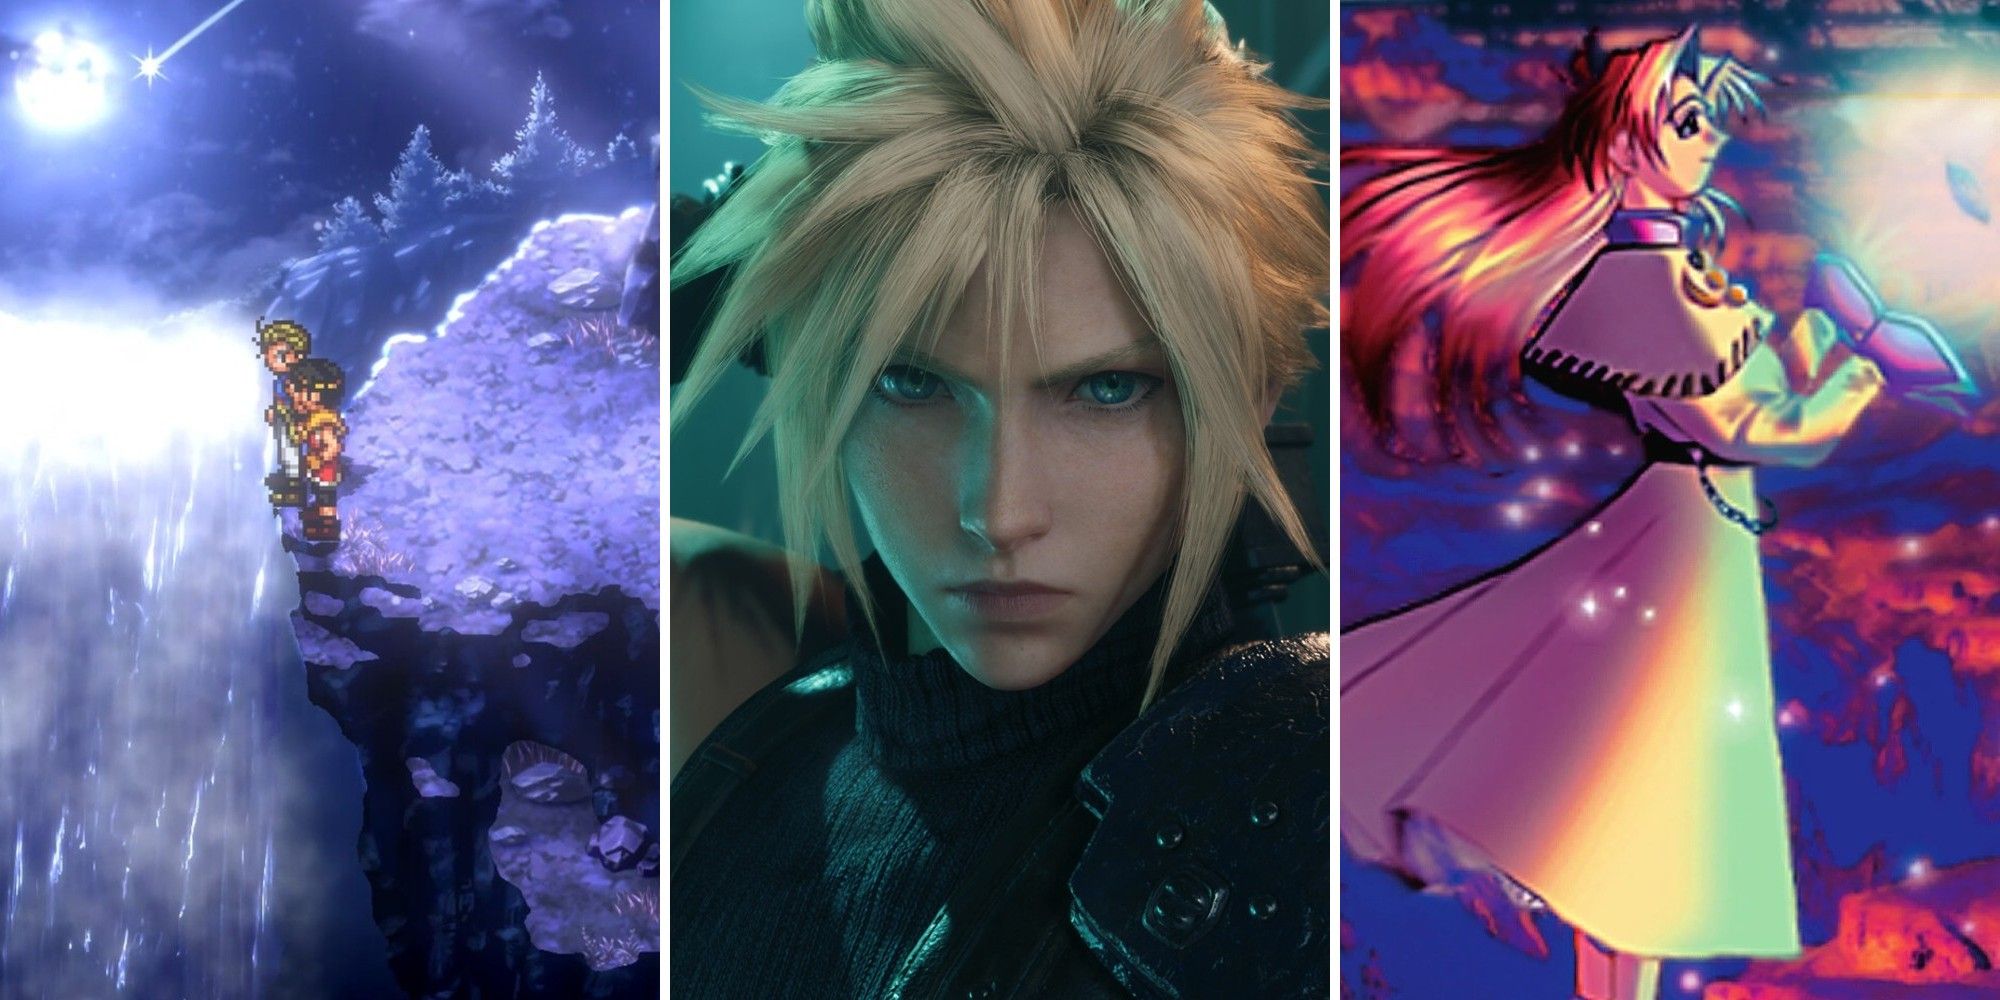 Split image Suikoden 2 characters on clifftop, Final Fantasy 7 Remake's Cloud, and Wild Arms character standing